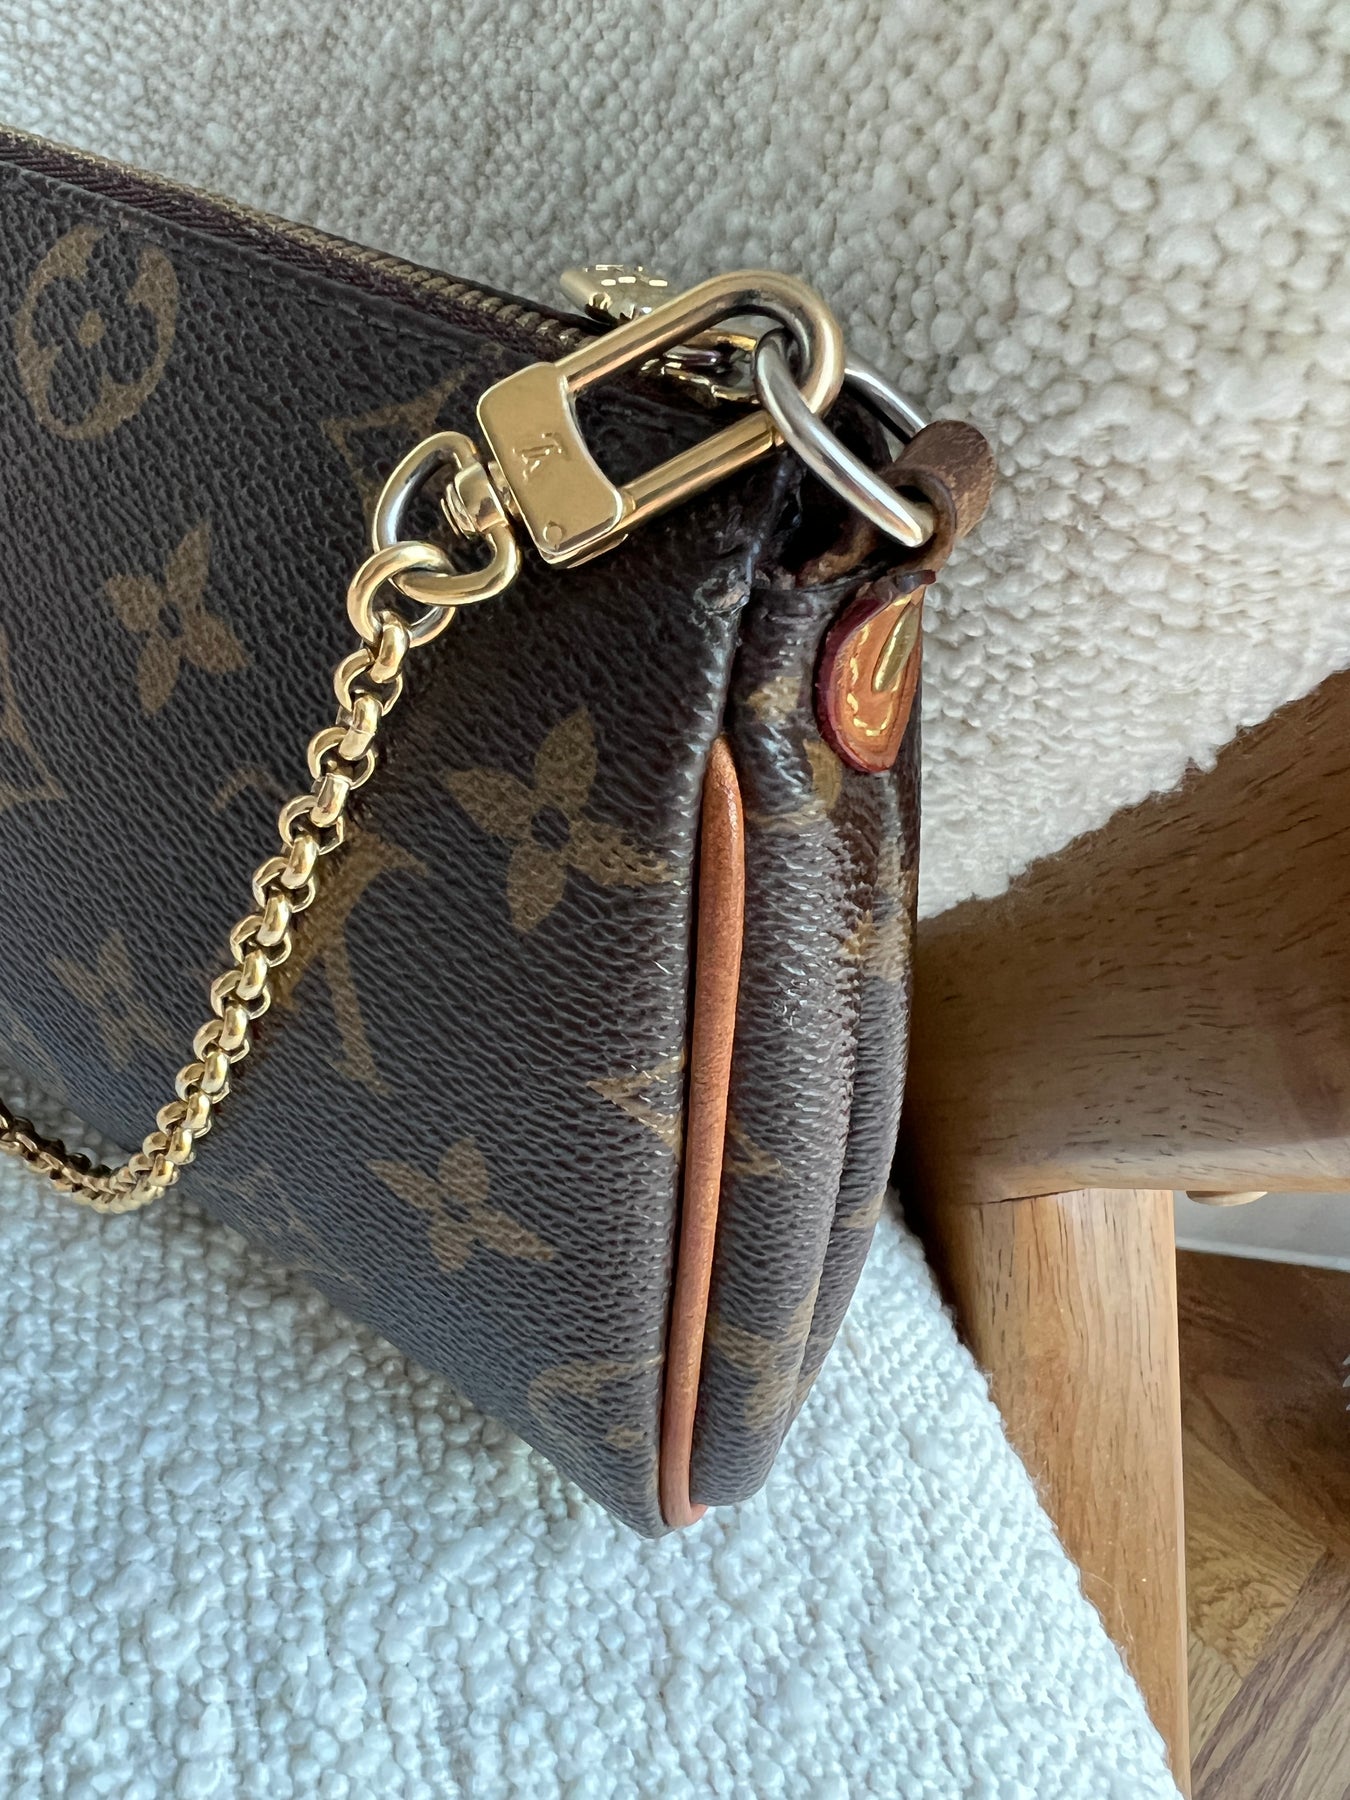 ❤️SOLD) Louis Vuitton Monogram Eva is up for grabs, comes with